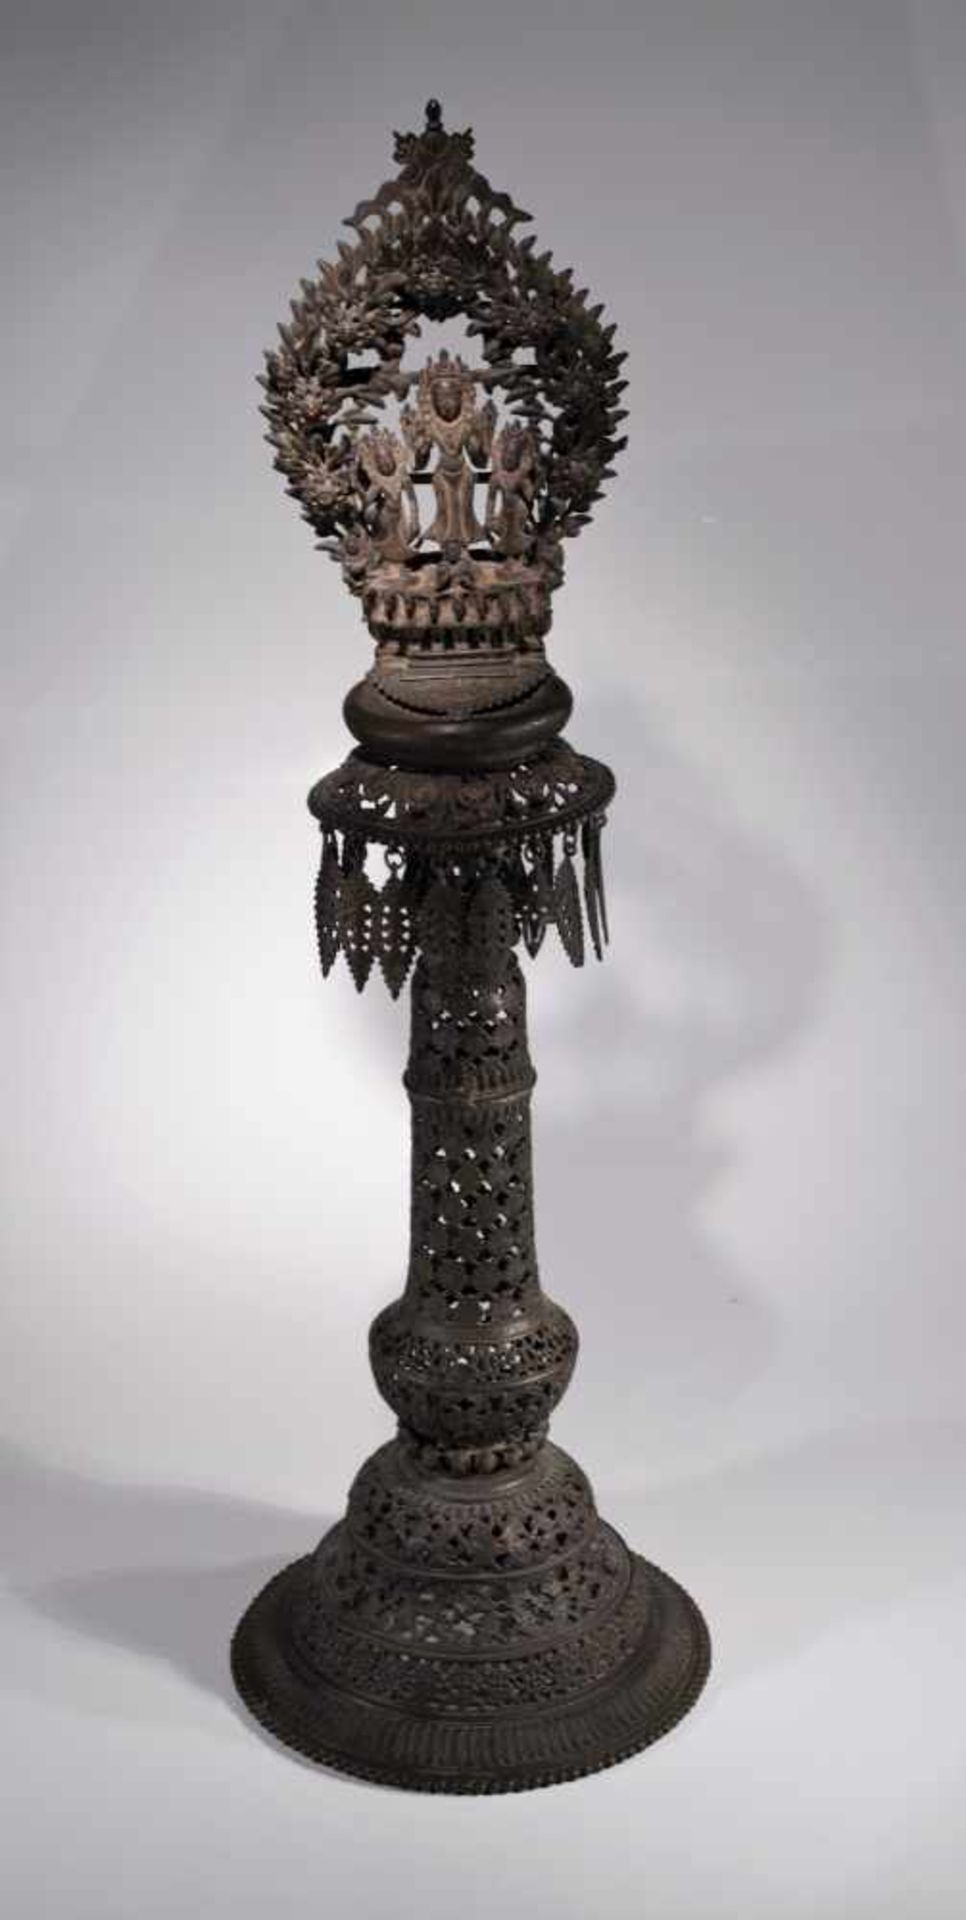 OFFERING LAMPBronze cast in several parts,Nepal 17th centuryDimensions: Height 117 cm , Wide 35 cm ,